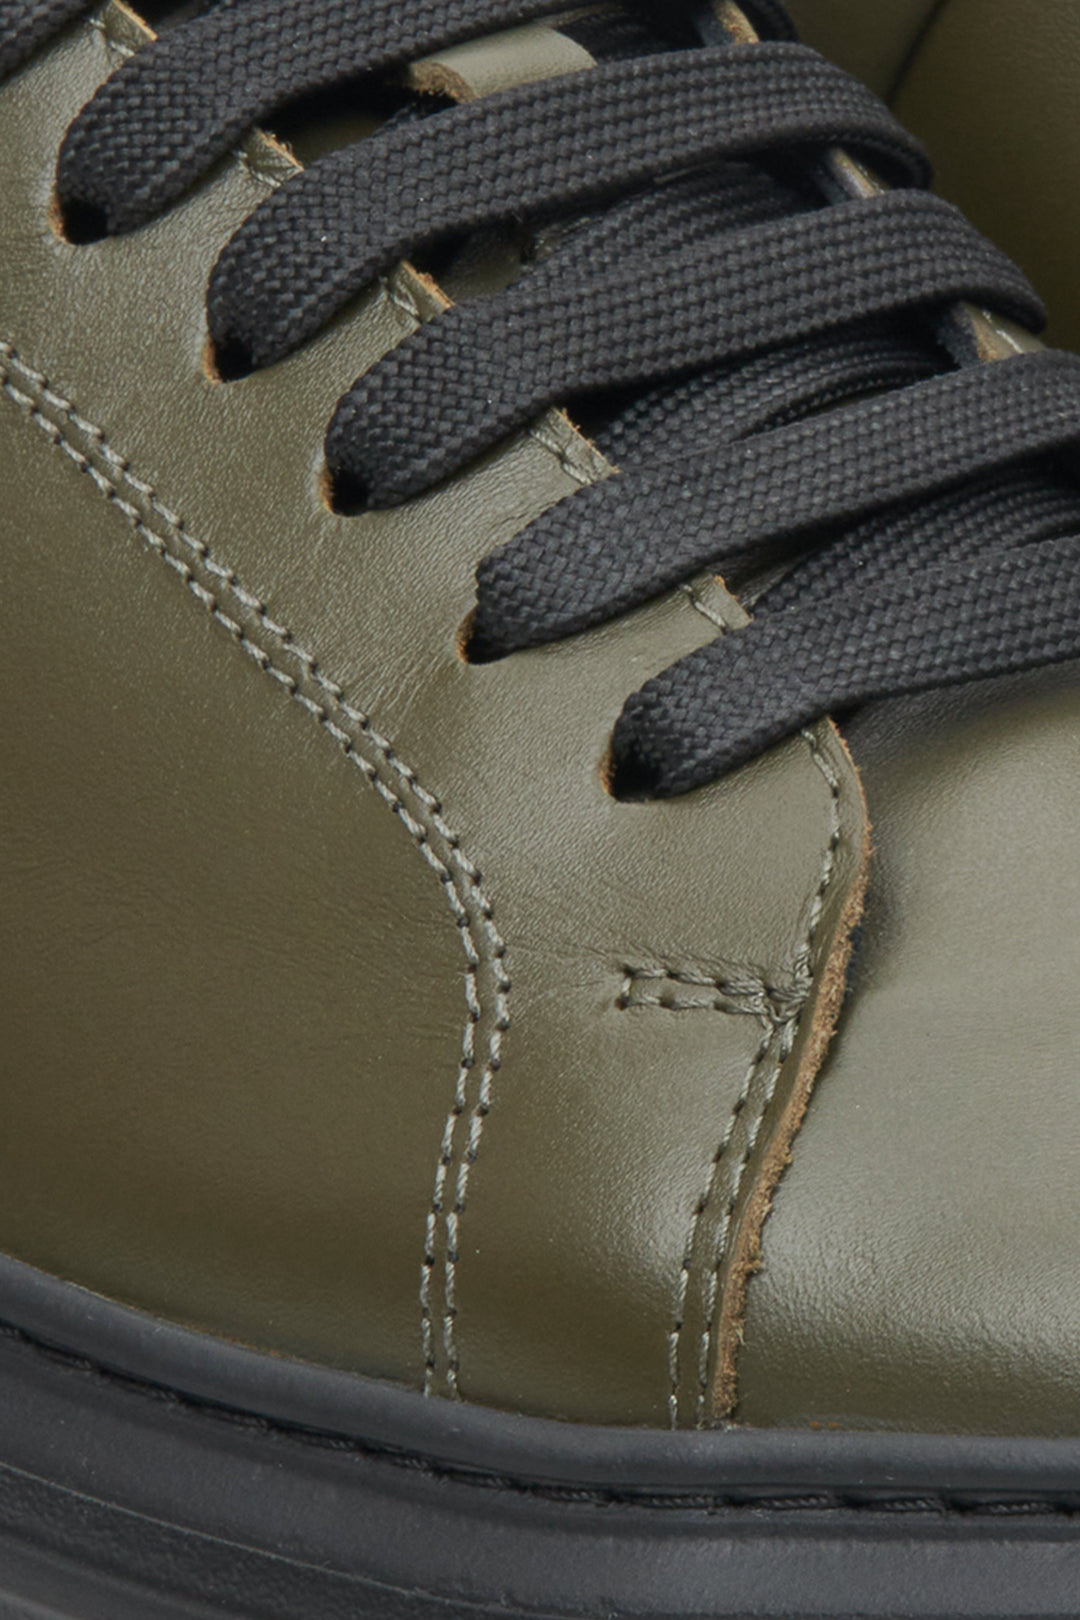 Leather khaki Estro men's sneakers with laces - close-up on the details.